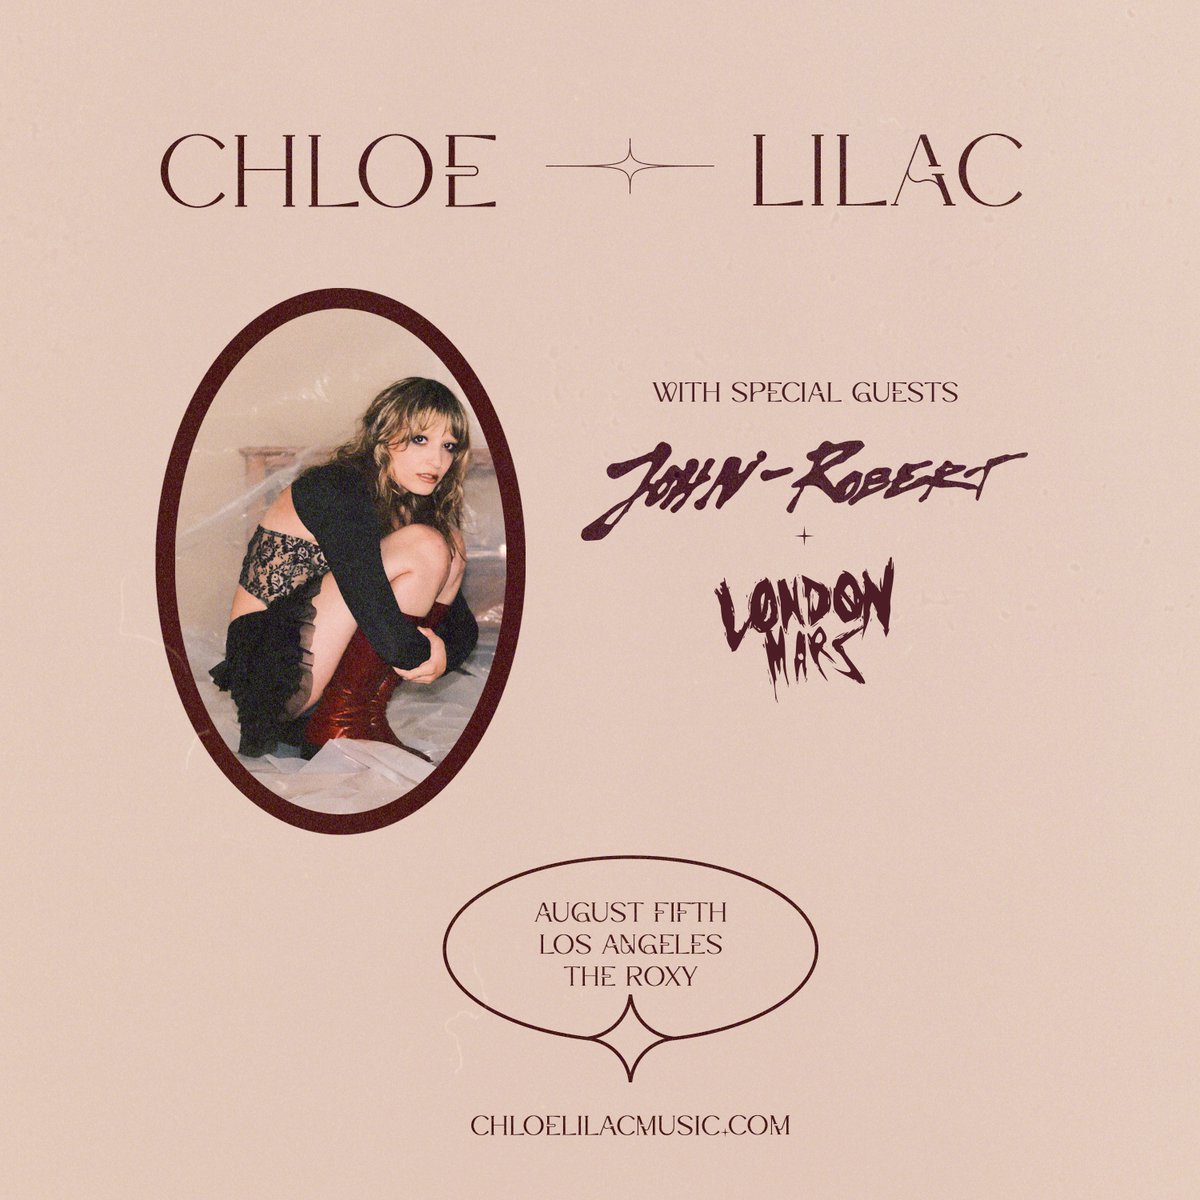 LA! My show at @theroxy will be supported by @johnrobert and @ldnmars_!! Get your tickets chloelilacmusic.com